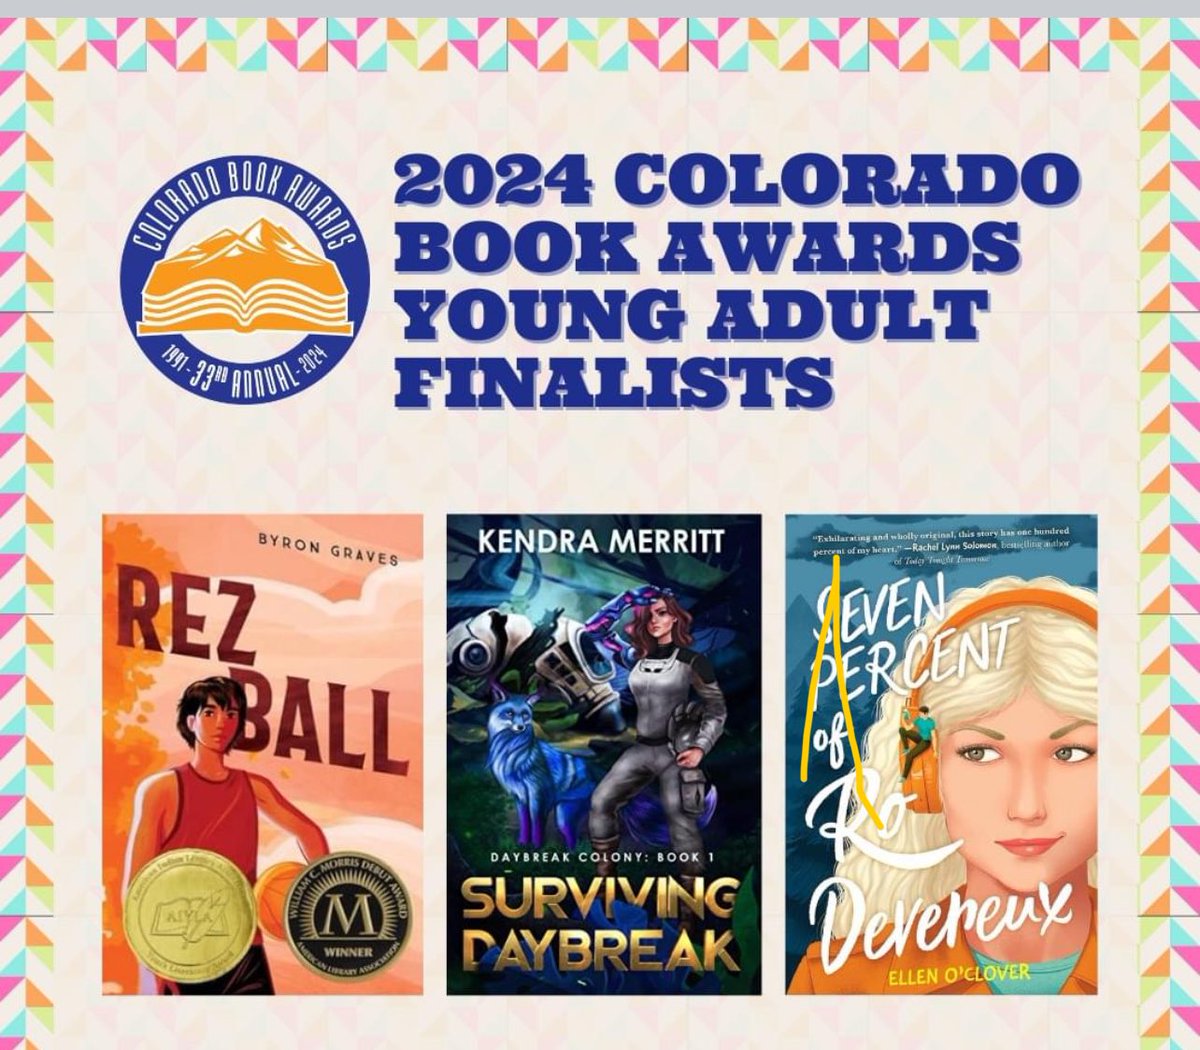 The 2024 #ColoradoBookAwards finalists for Young Adult Literature include Surviving Daybreak by @Kendra_Merritt, Seven Percent of Ro Devereux by @ellenoclover, and Rez Ball by our @byrongraves - how exciting! #YA #Colorado #ColoradoBookAwards2024